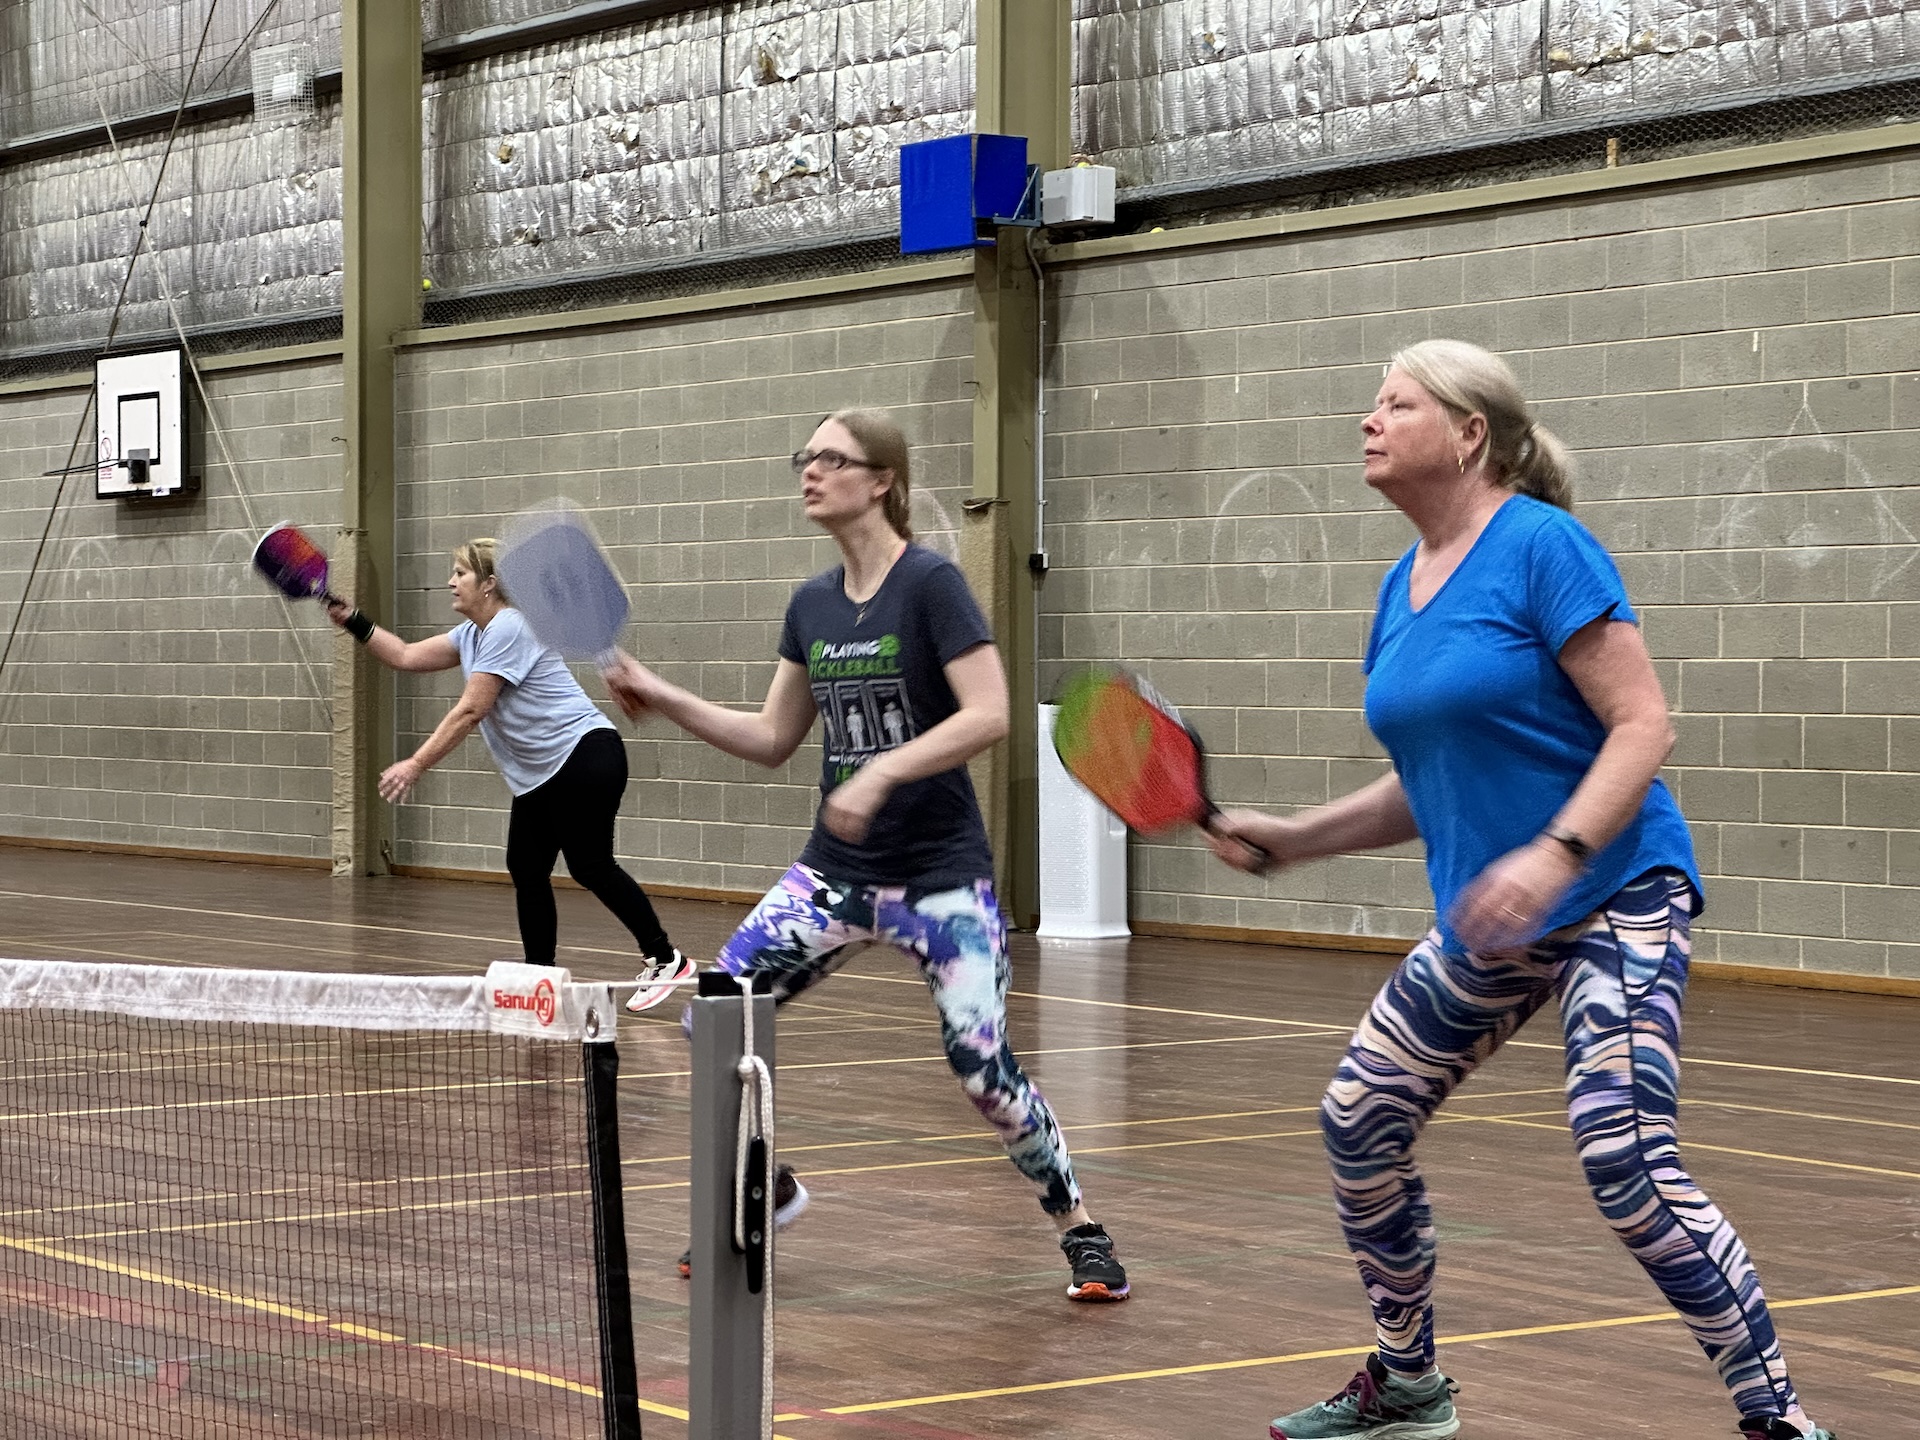 Pickleball at the Primary School Hall in Drysdale